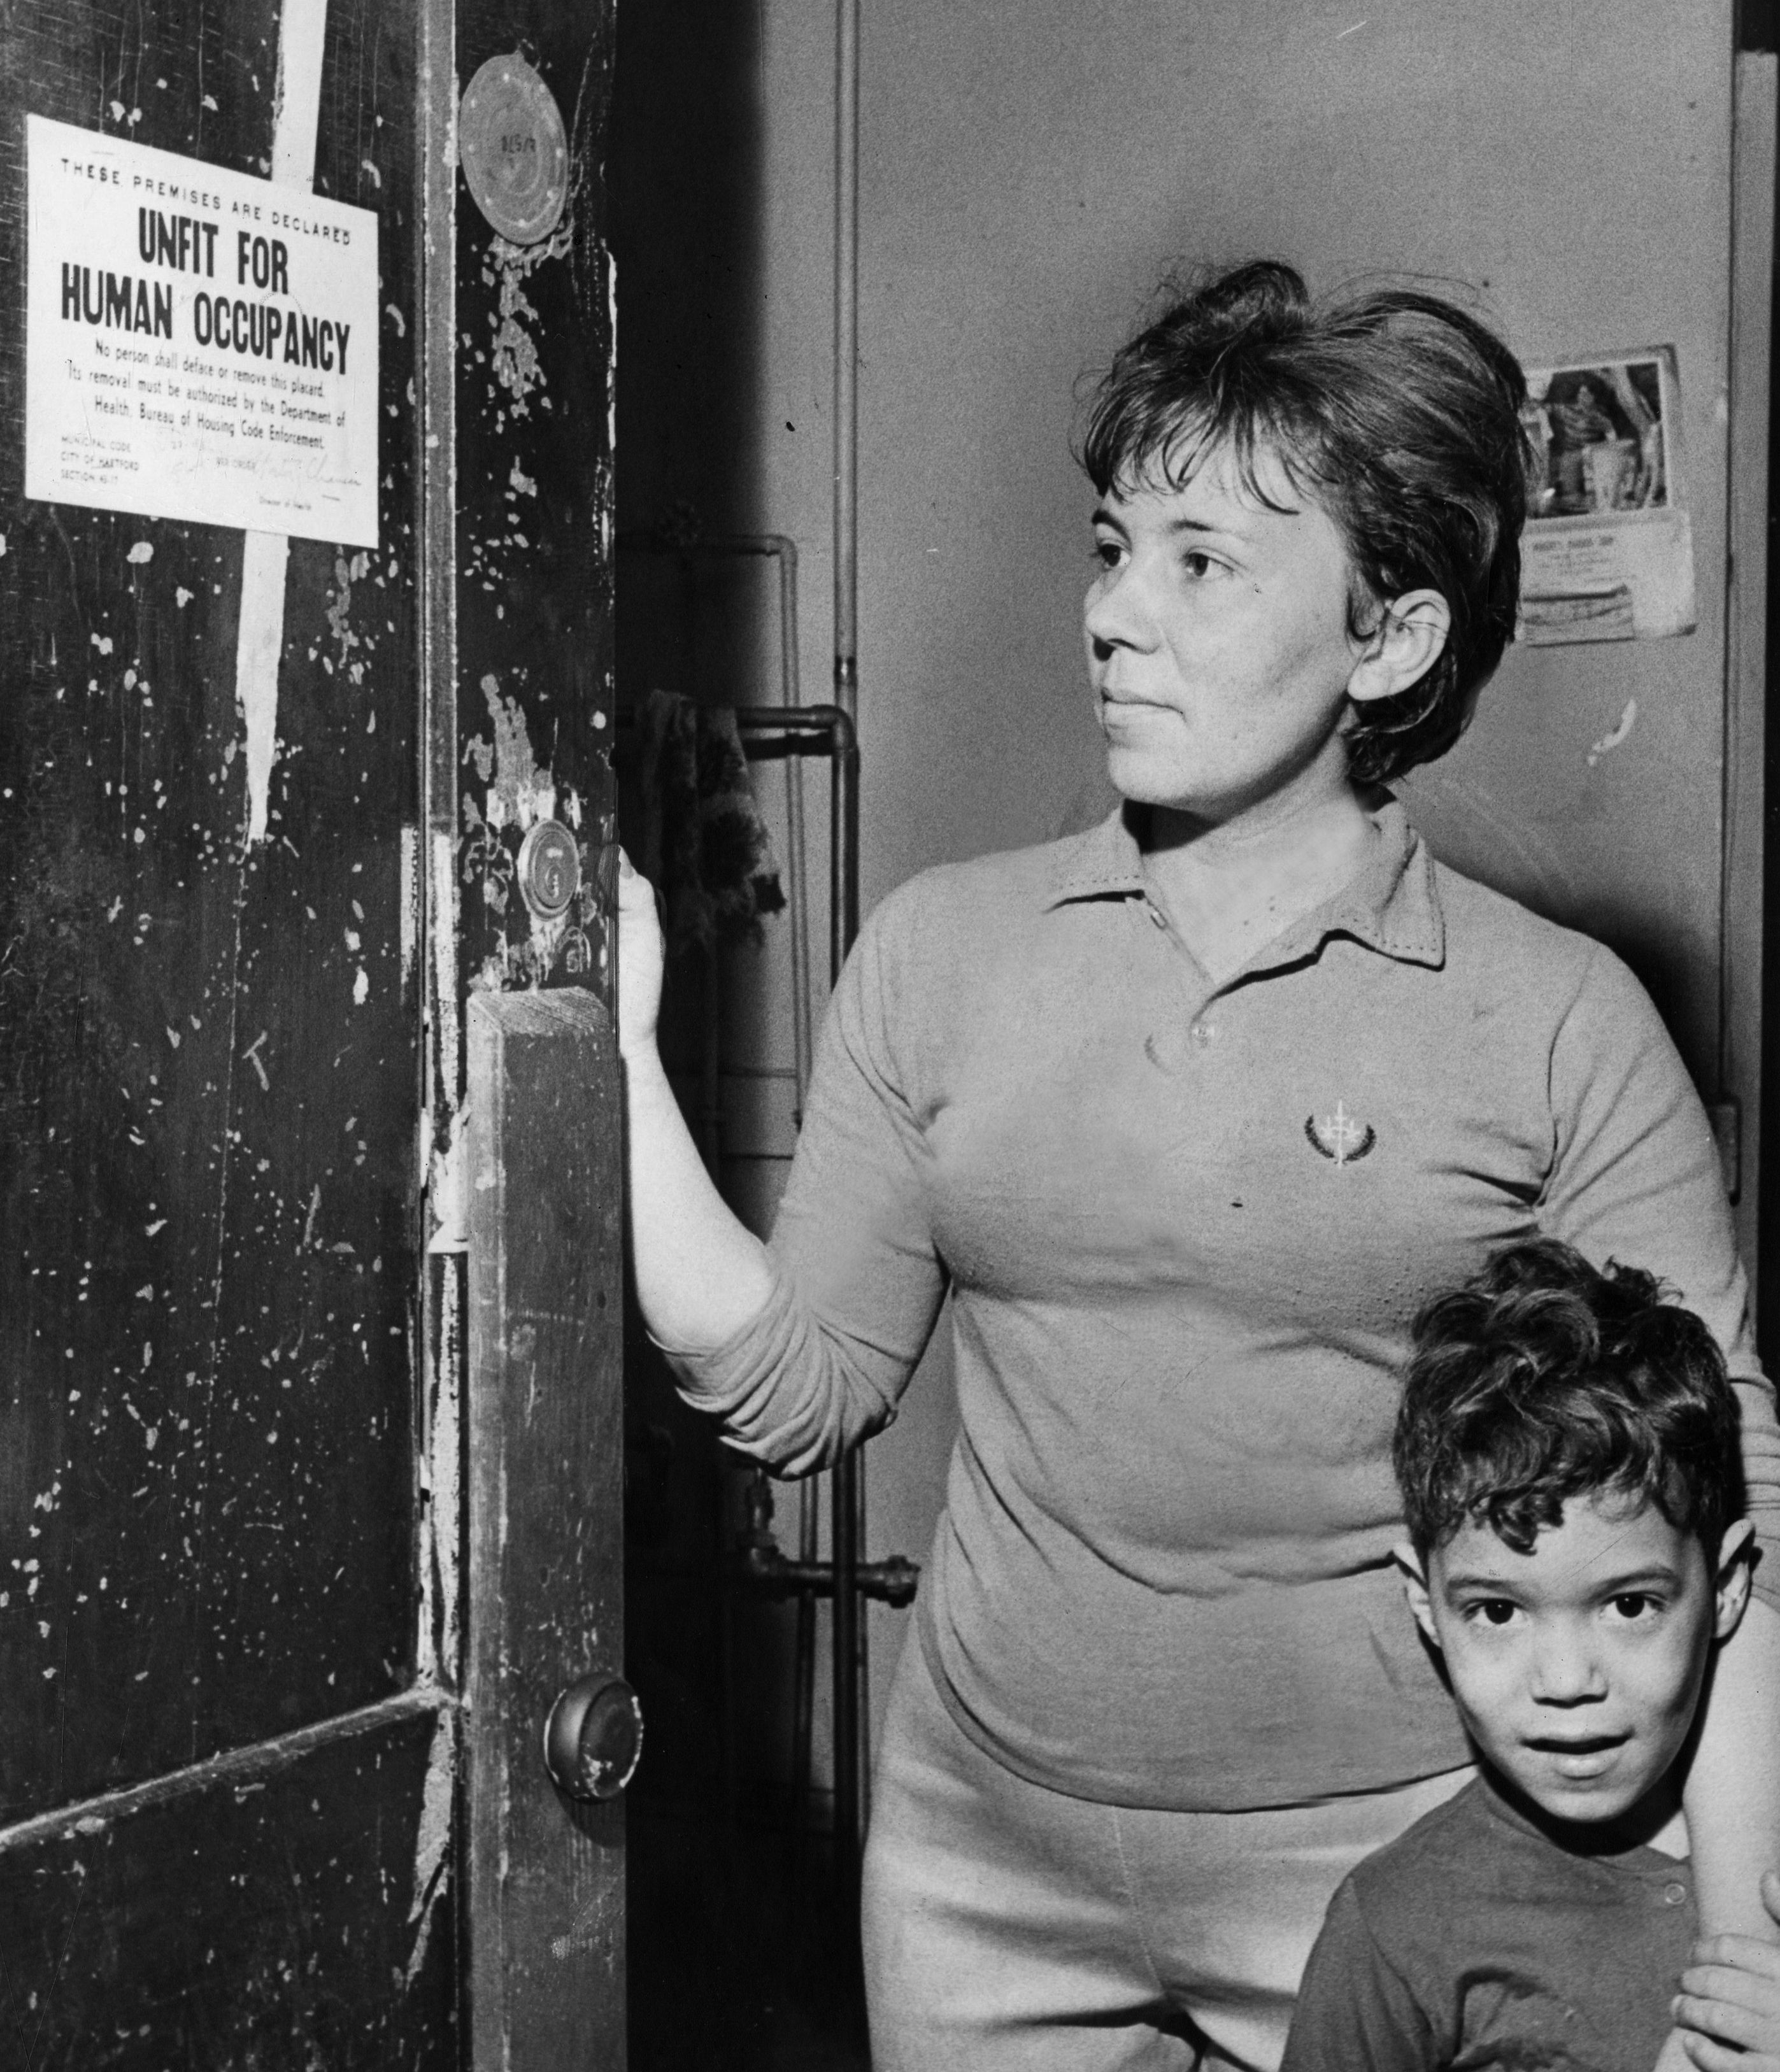 A tenant examines the distressing notification that her building is 'unfit for human occupancy,' on Feb. 2, 1970. The building was owned by Jerome Diamond, who was cited for numerous housing code violations and was issued warrants to appear in housing court.